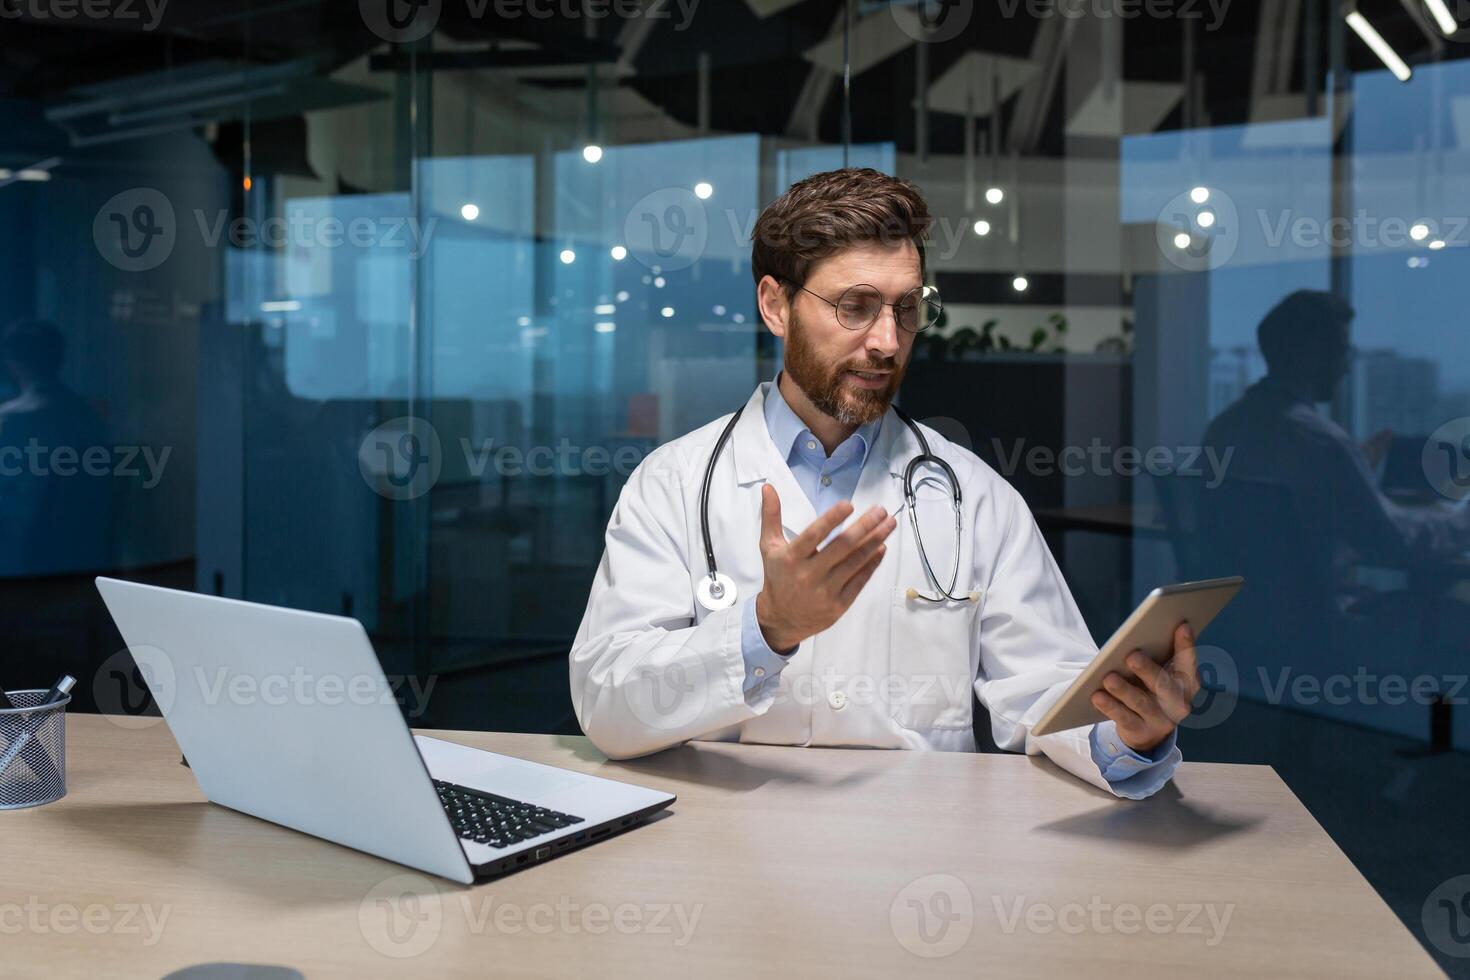 call online consultation of a doctor, an experienced doctor works inside the office of a modern clinic, gives a consultation remotely, uses a tablet to communicate photo